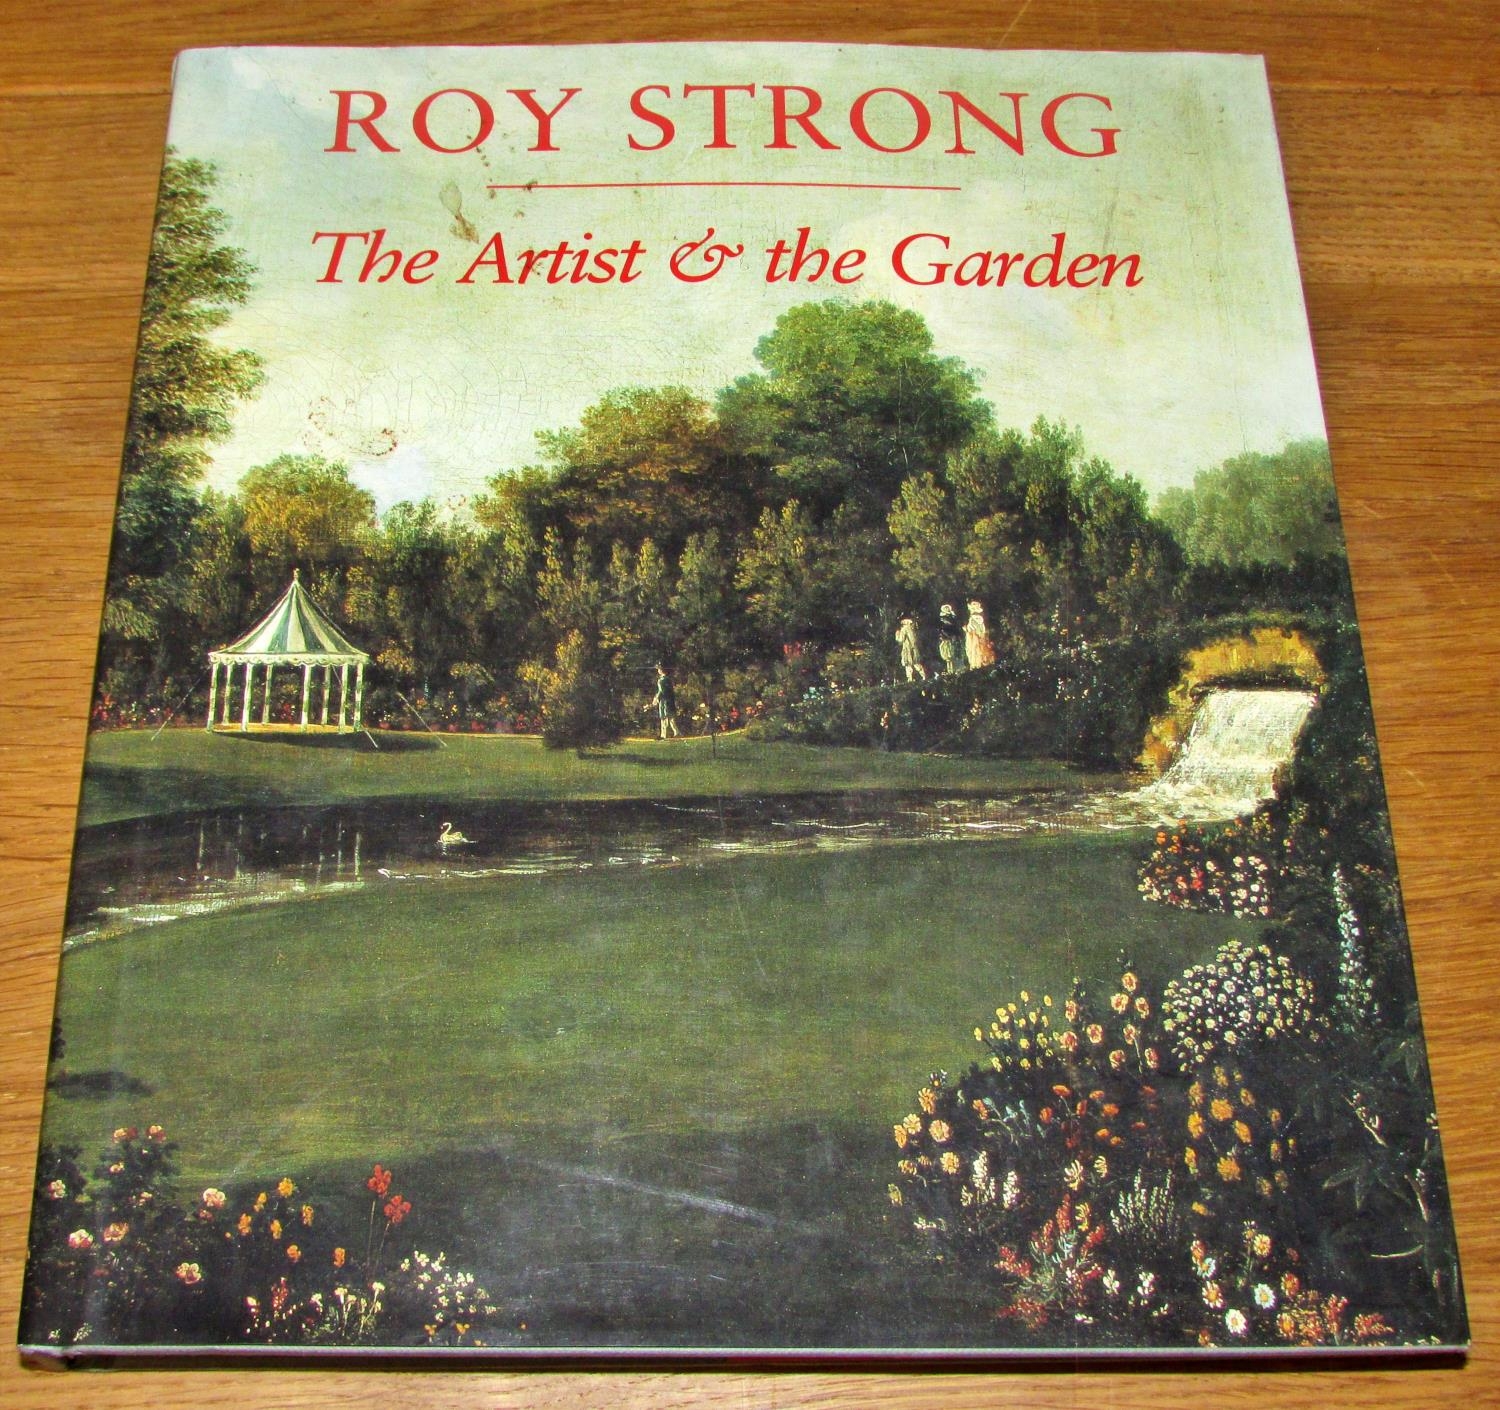 A large group of works on gardening and gardens including The Ultimate Rose Book & The Gardens of - Image 4 of 6